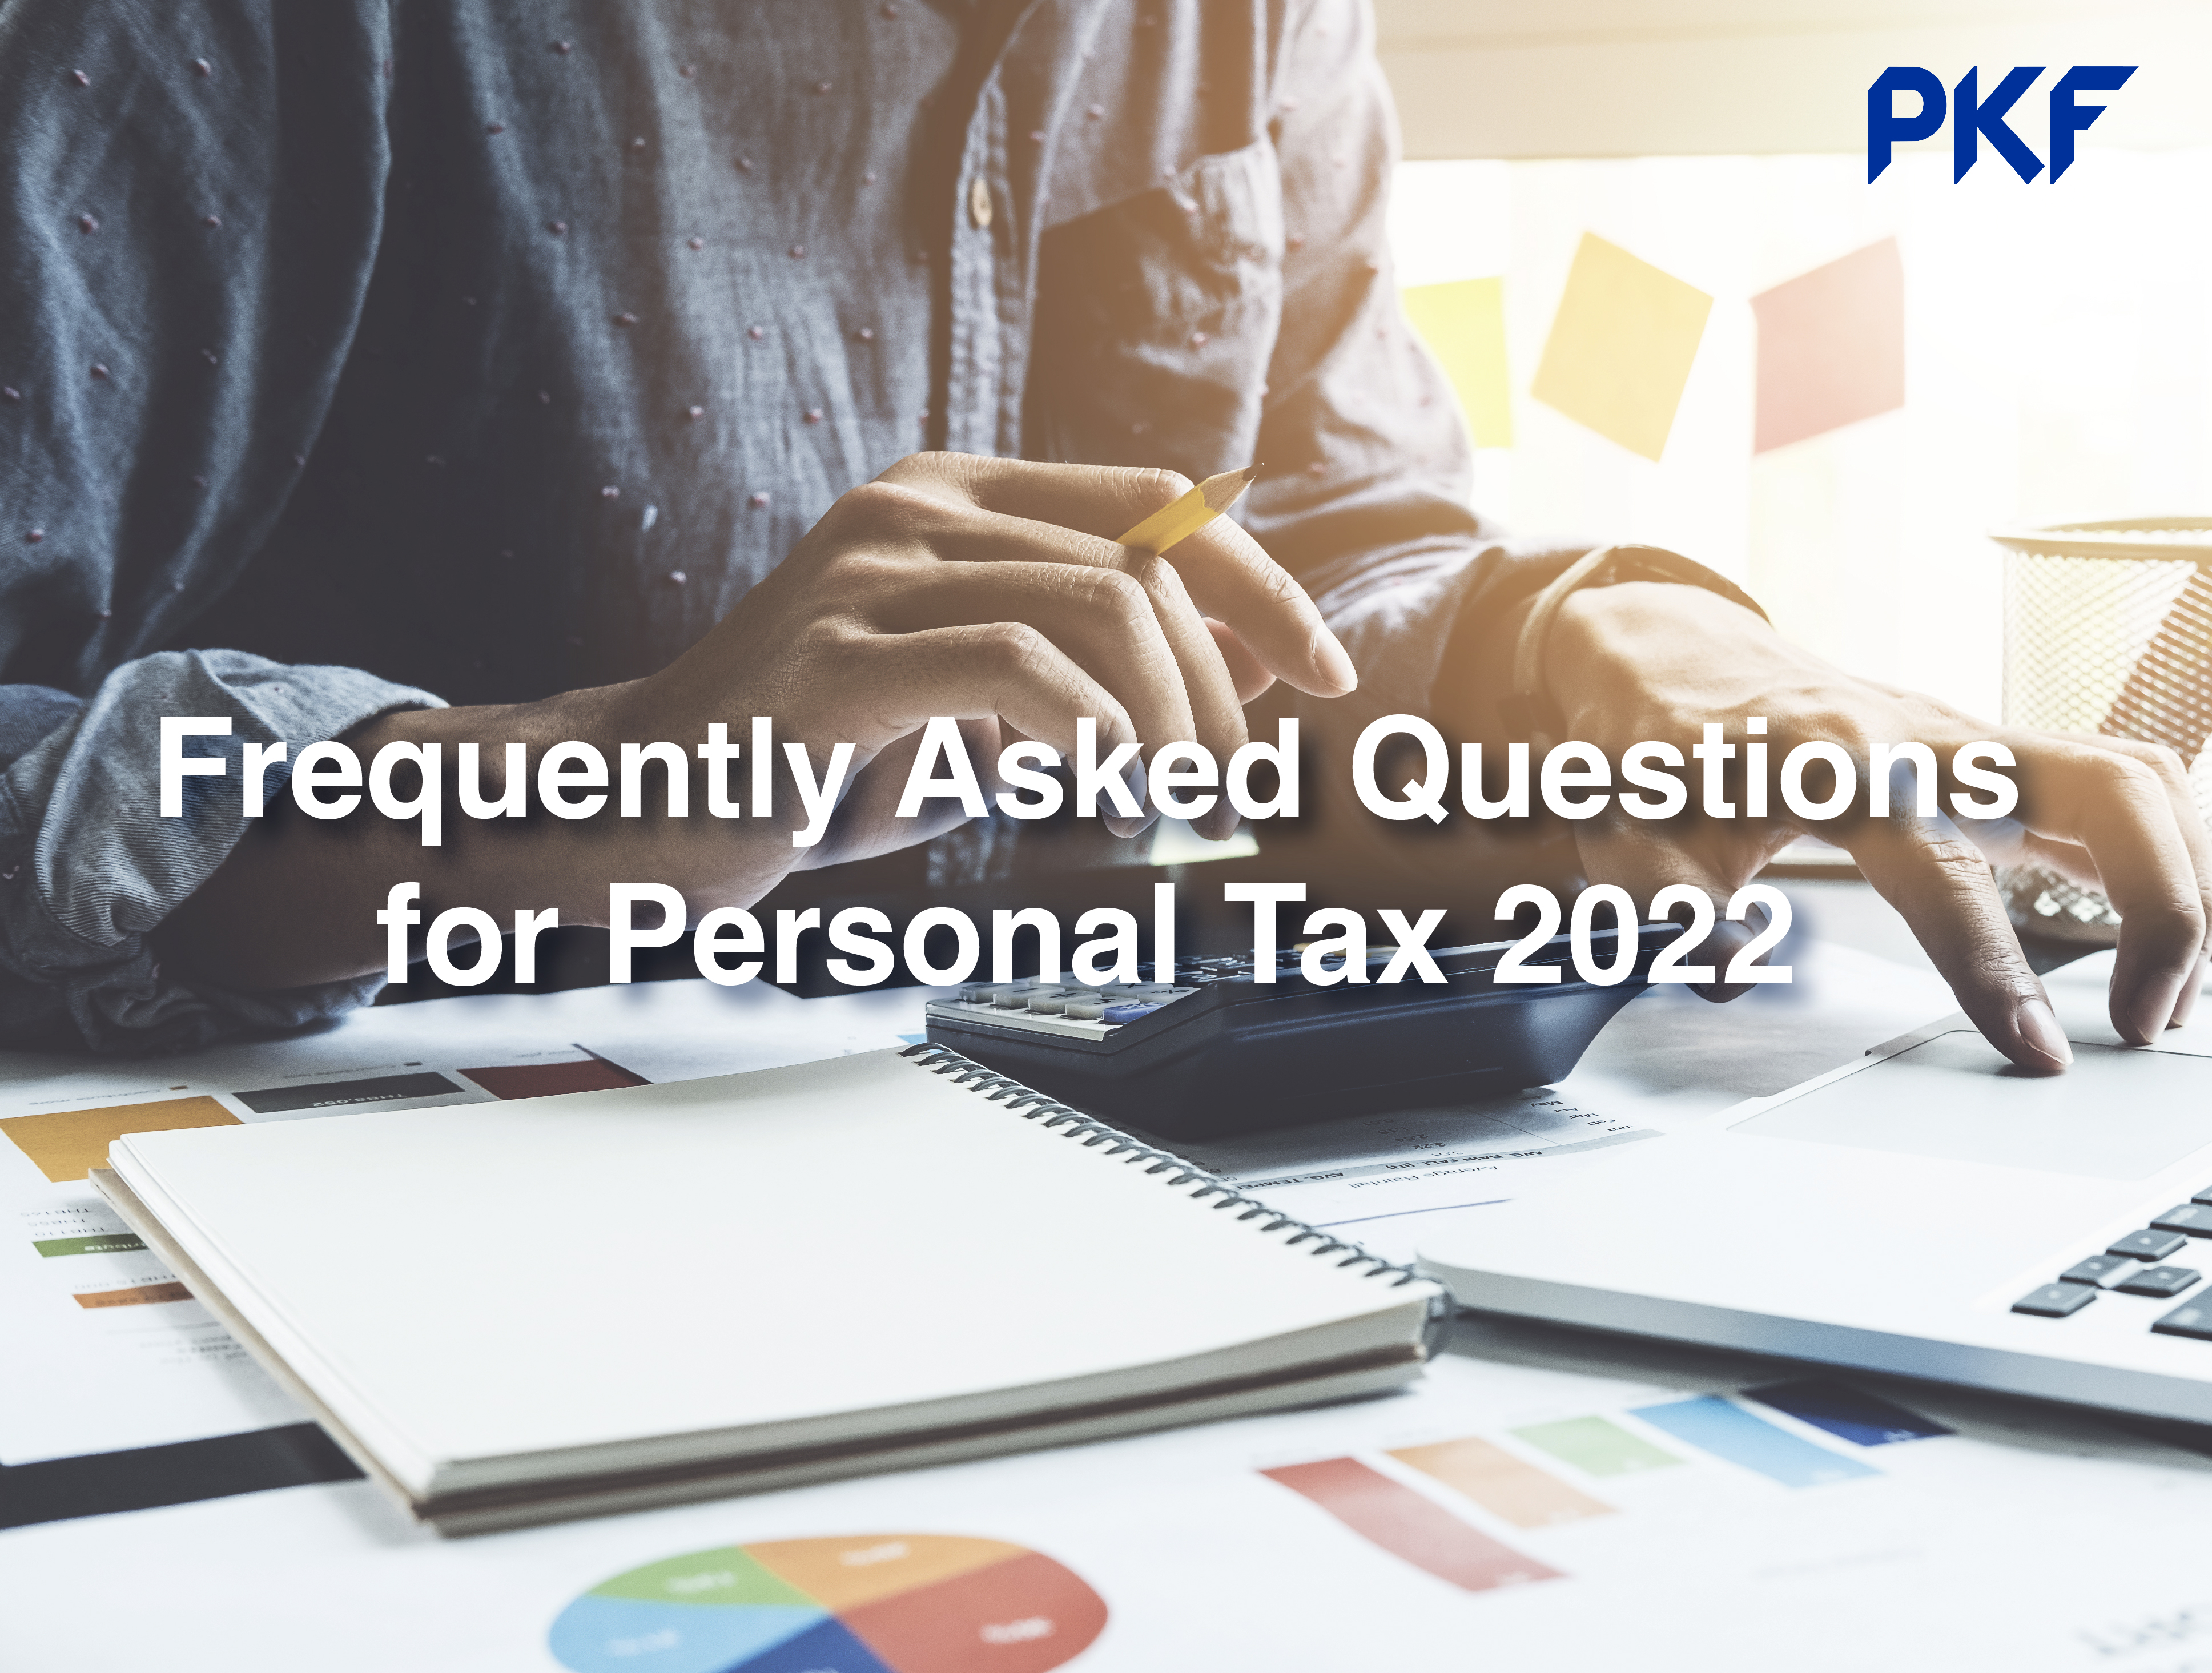 12 Frequently Asked Questions for Personal Tax 2022